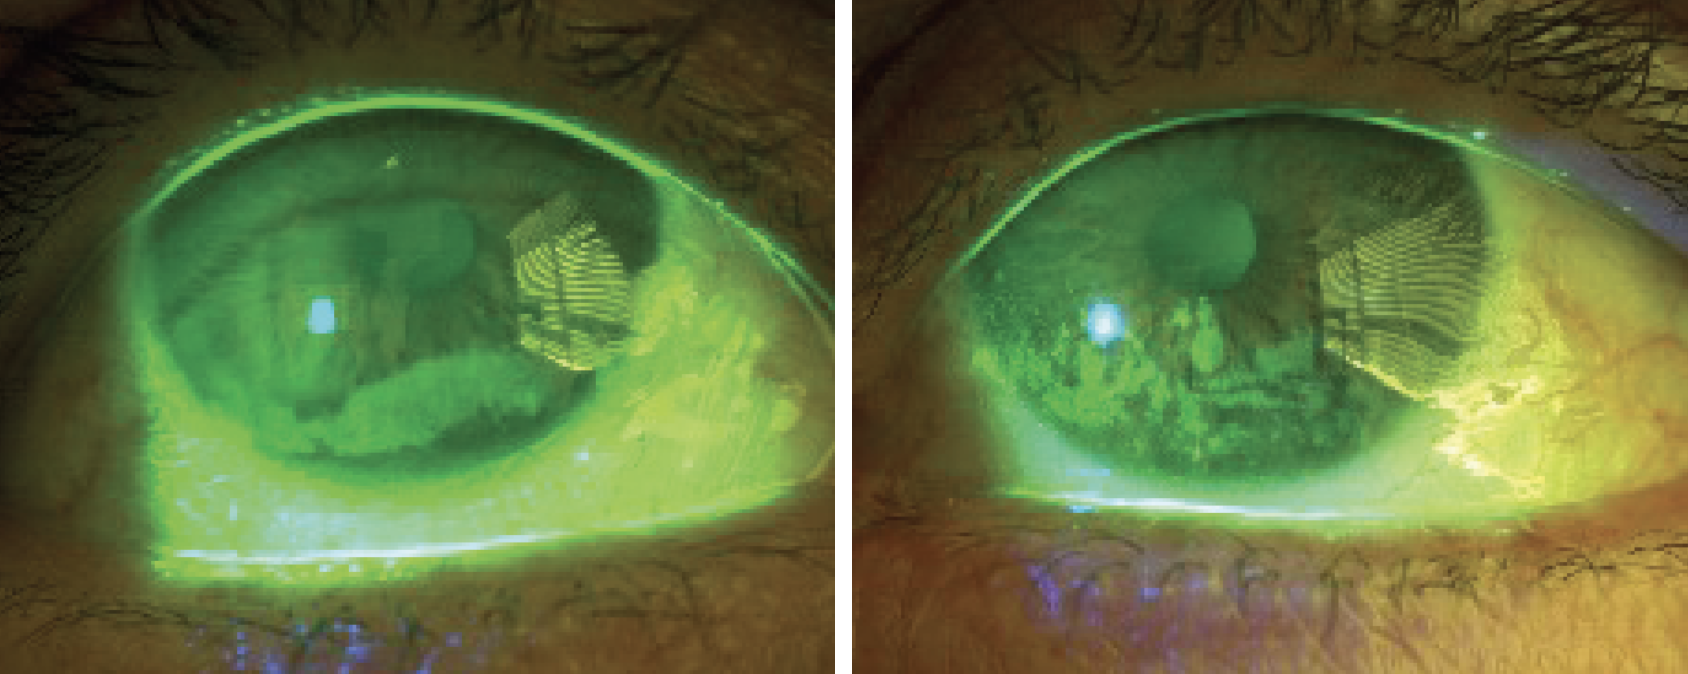 Fig. 1. OD persistent inferior corneal epithelial defect, OS persistent confluent inferior and central SPK.